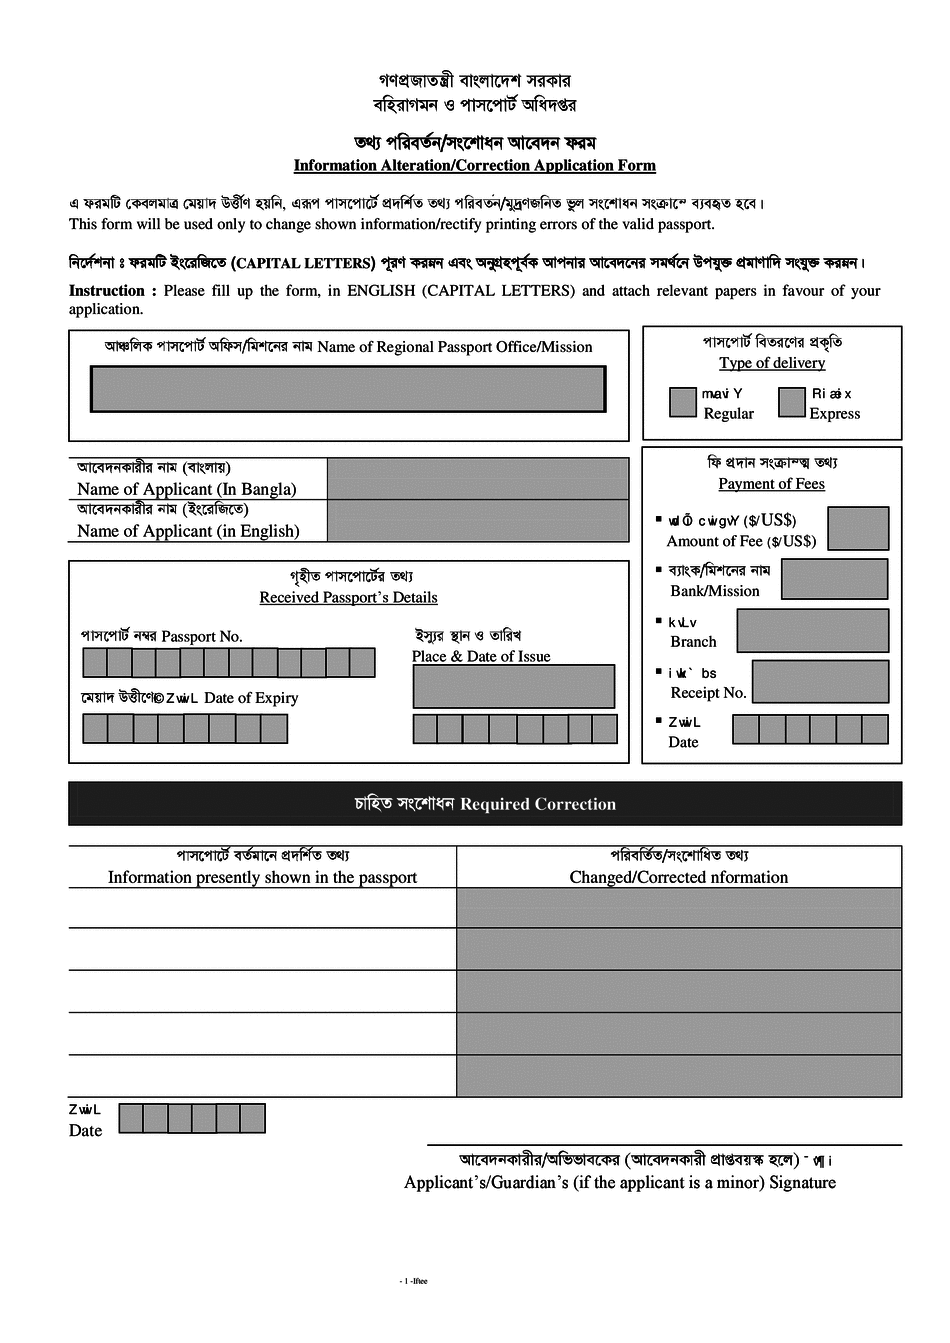 Reissue Information Alteration Correction Application Form Printable 